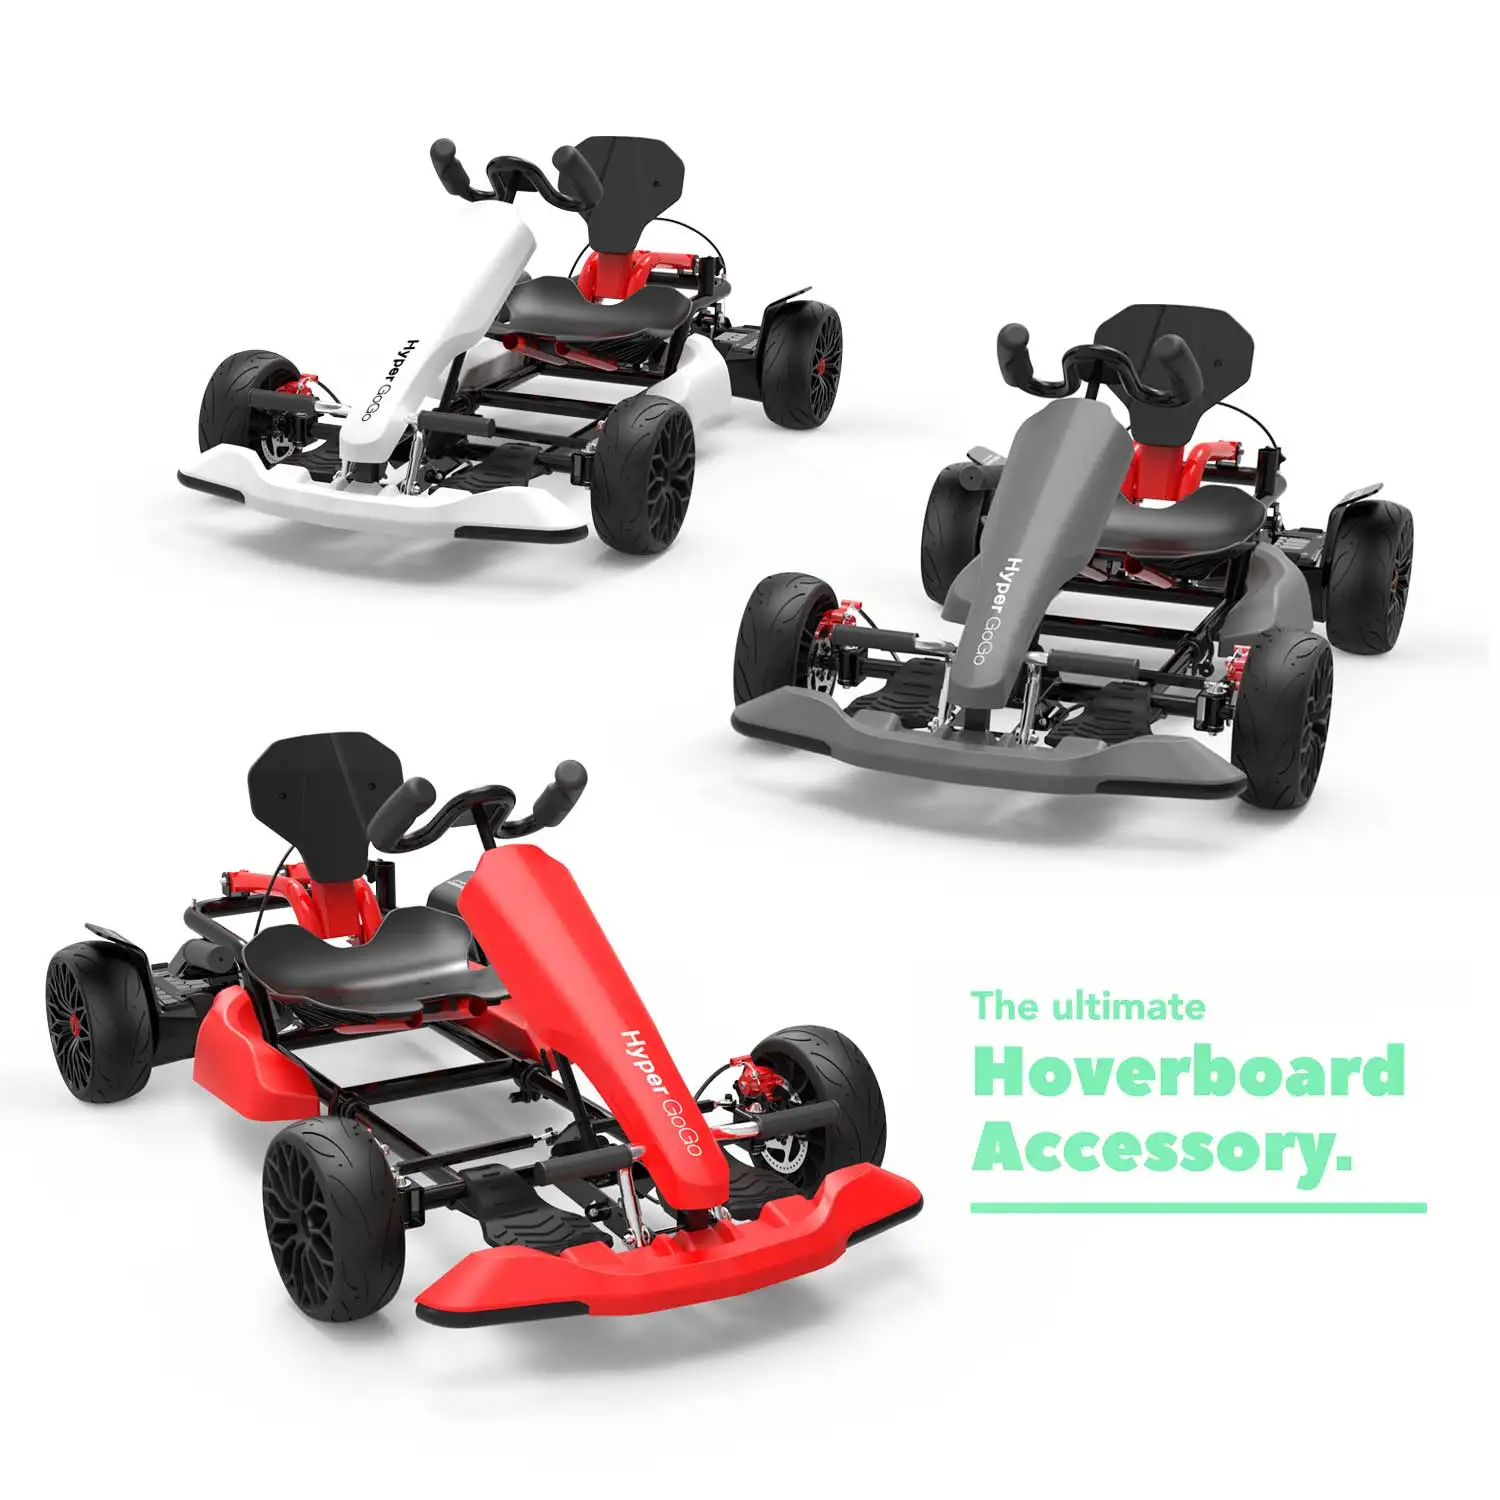 Electric Racing Go Karting Cars 390W double driving big power Pedal Go Karts for Kids Adult 12V 7AH battery